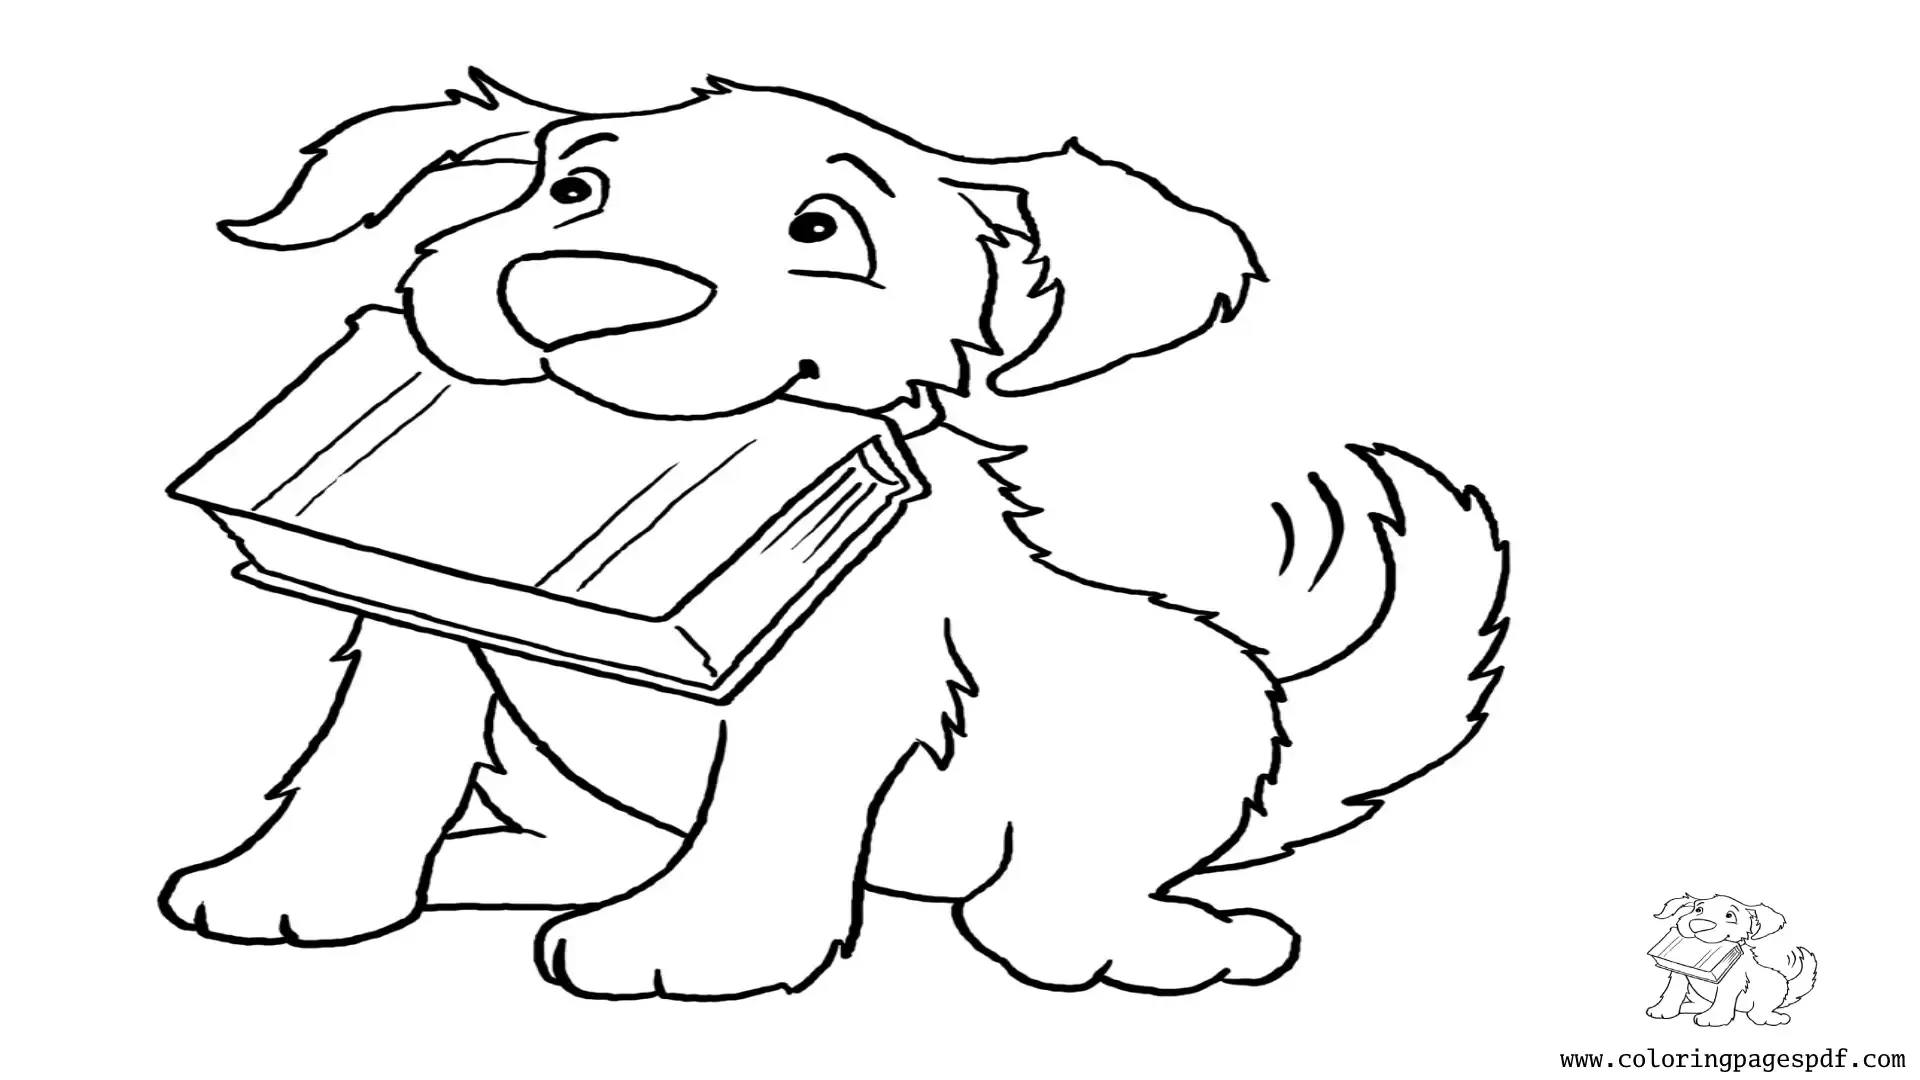 Coloring Page Of A Puppy Holding A Book